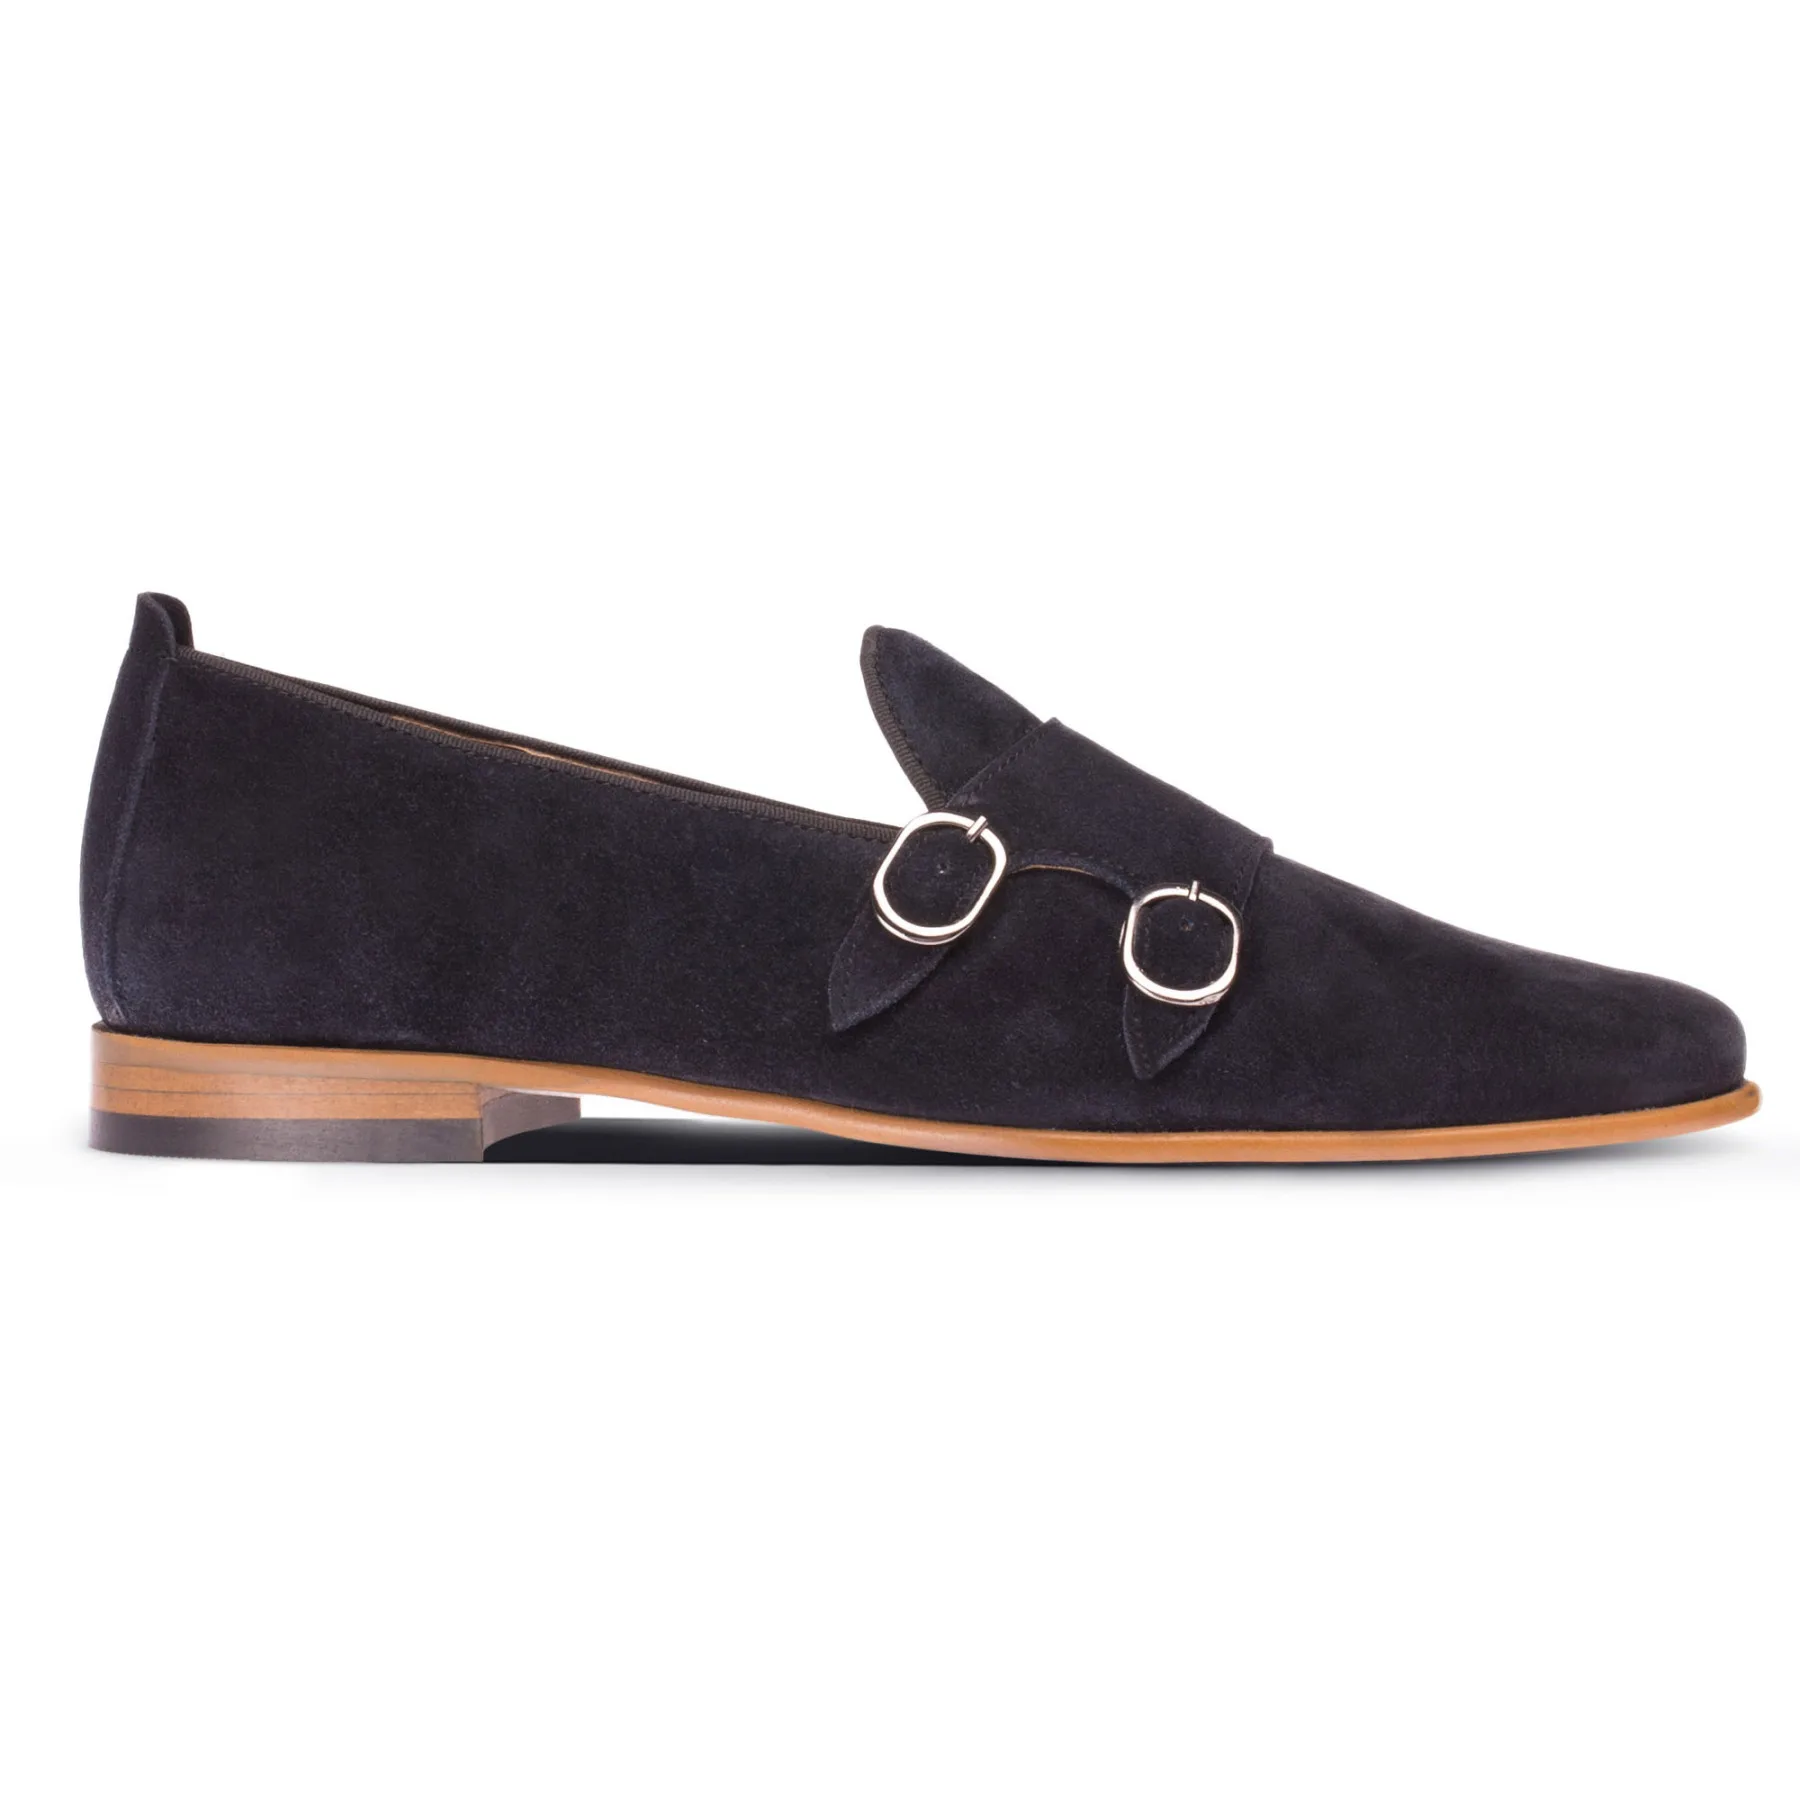 

Deery, Genuine LeatherMen 'S Navy Suede Calfskin Monk-Strap Loafers Moccasins Breathable Slip on Flats Male Driving Shoes 2021